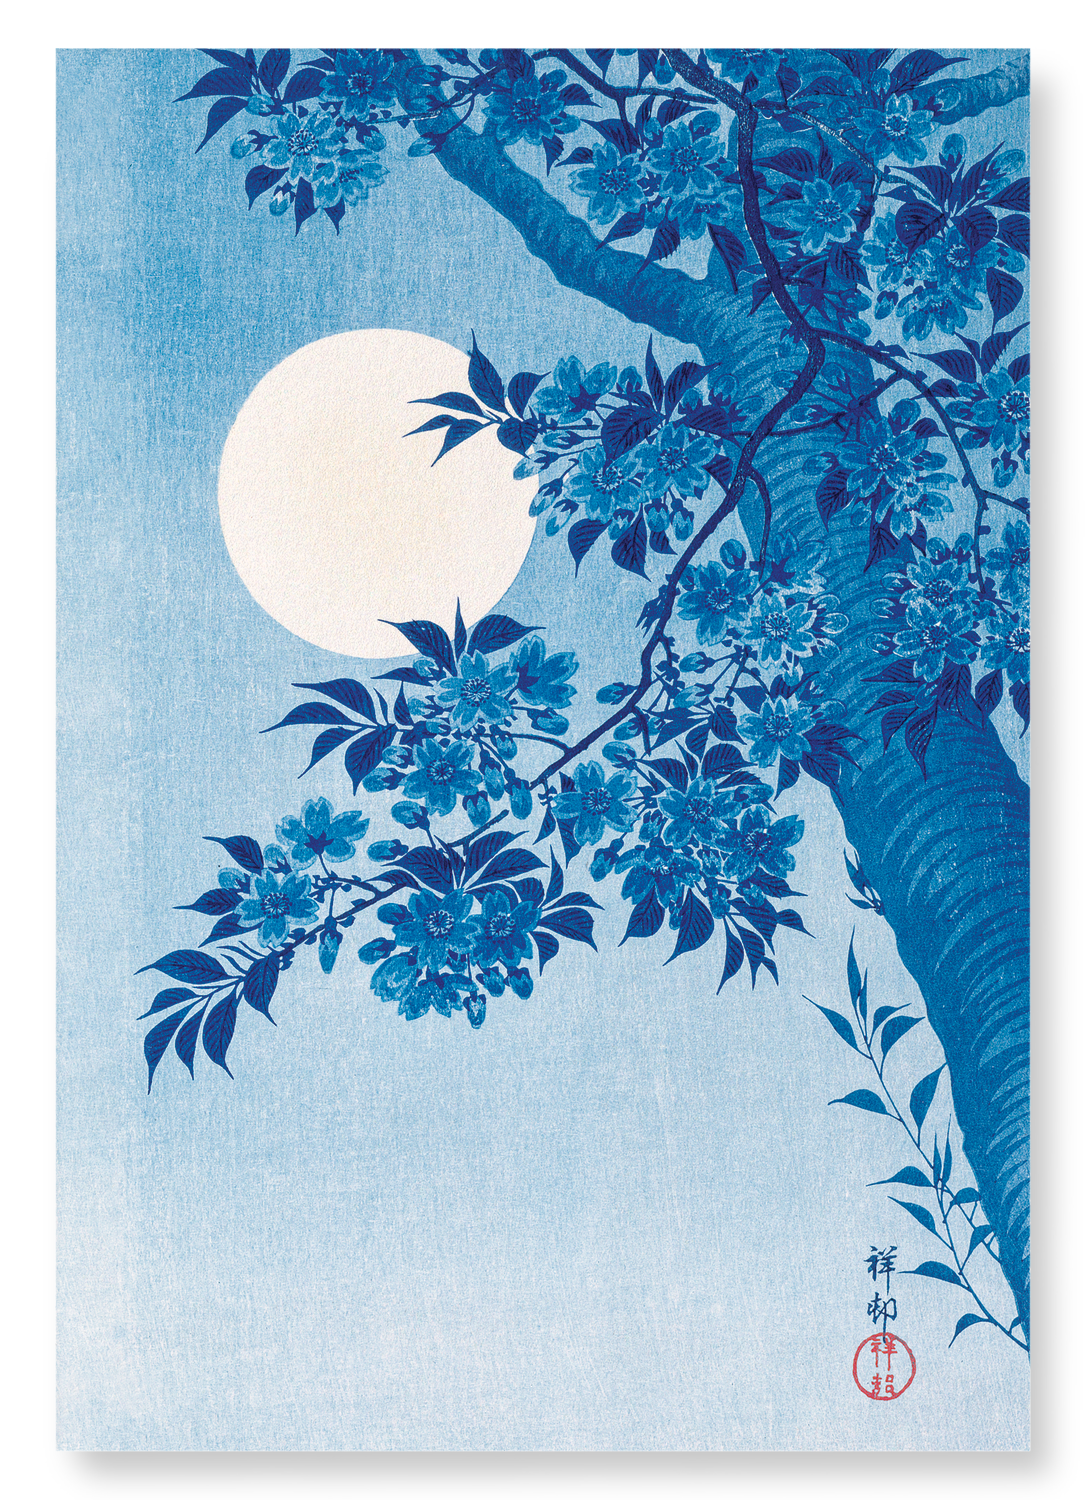 CHERRY BLOSSOMS IN THE MOON (C.1910): Japanese Art Print